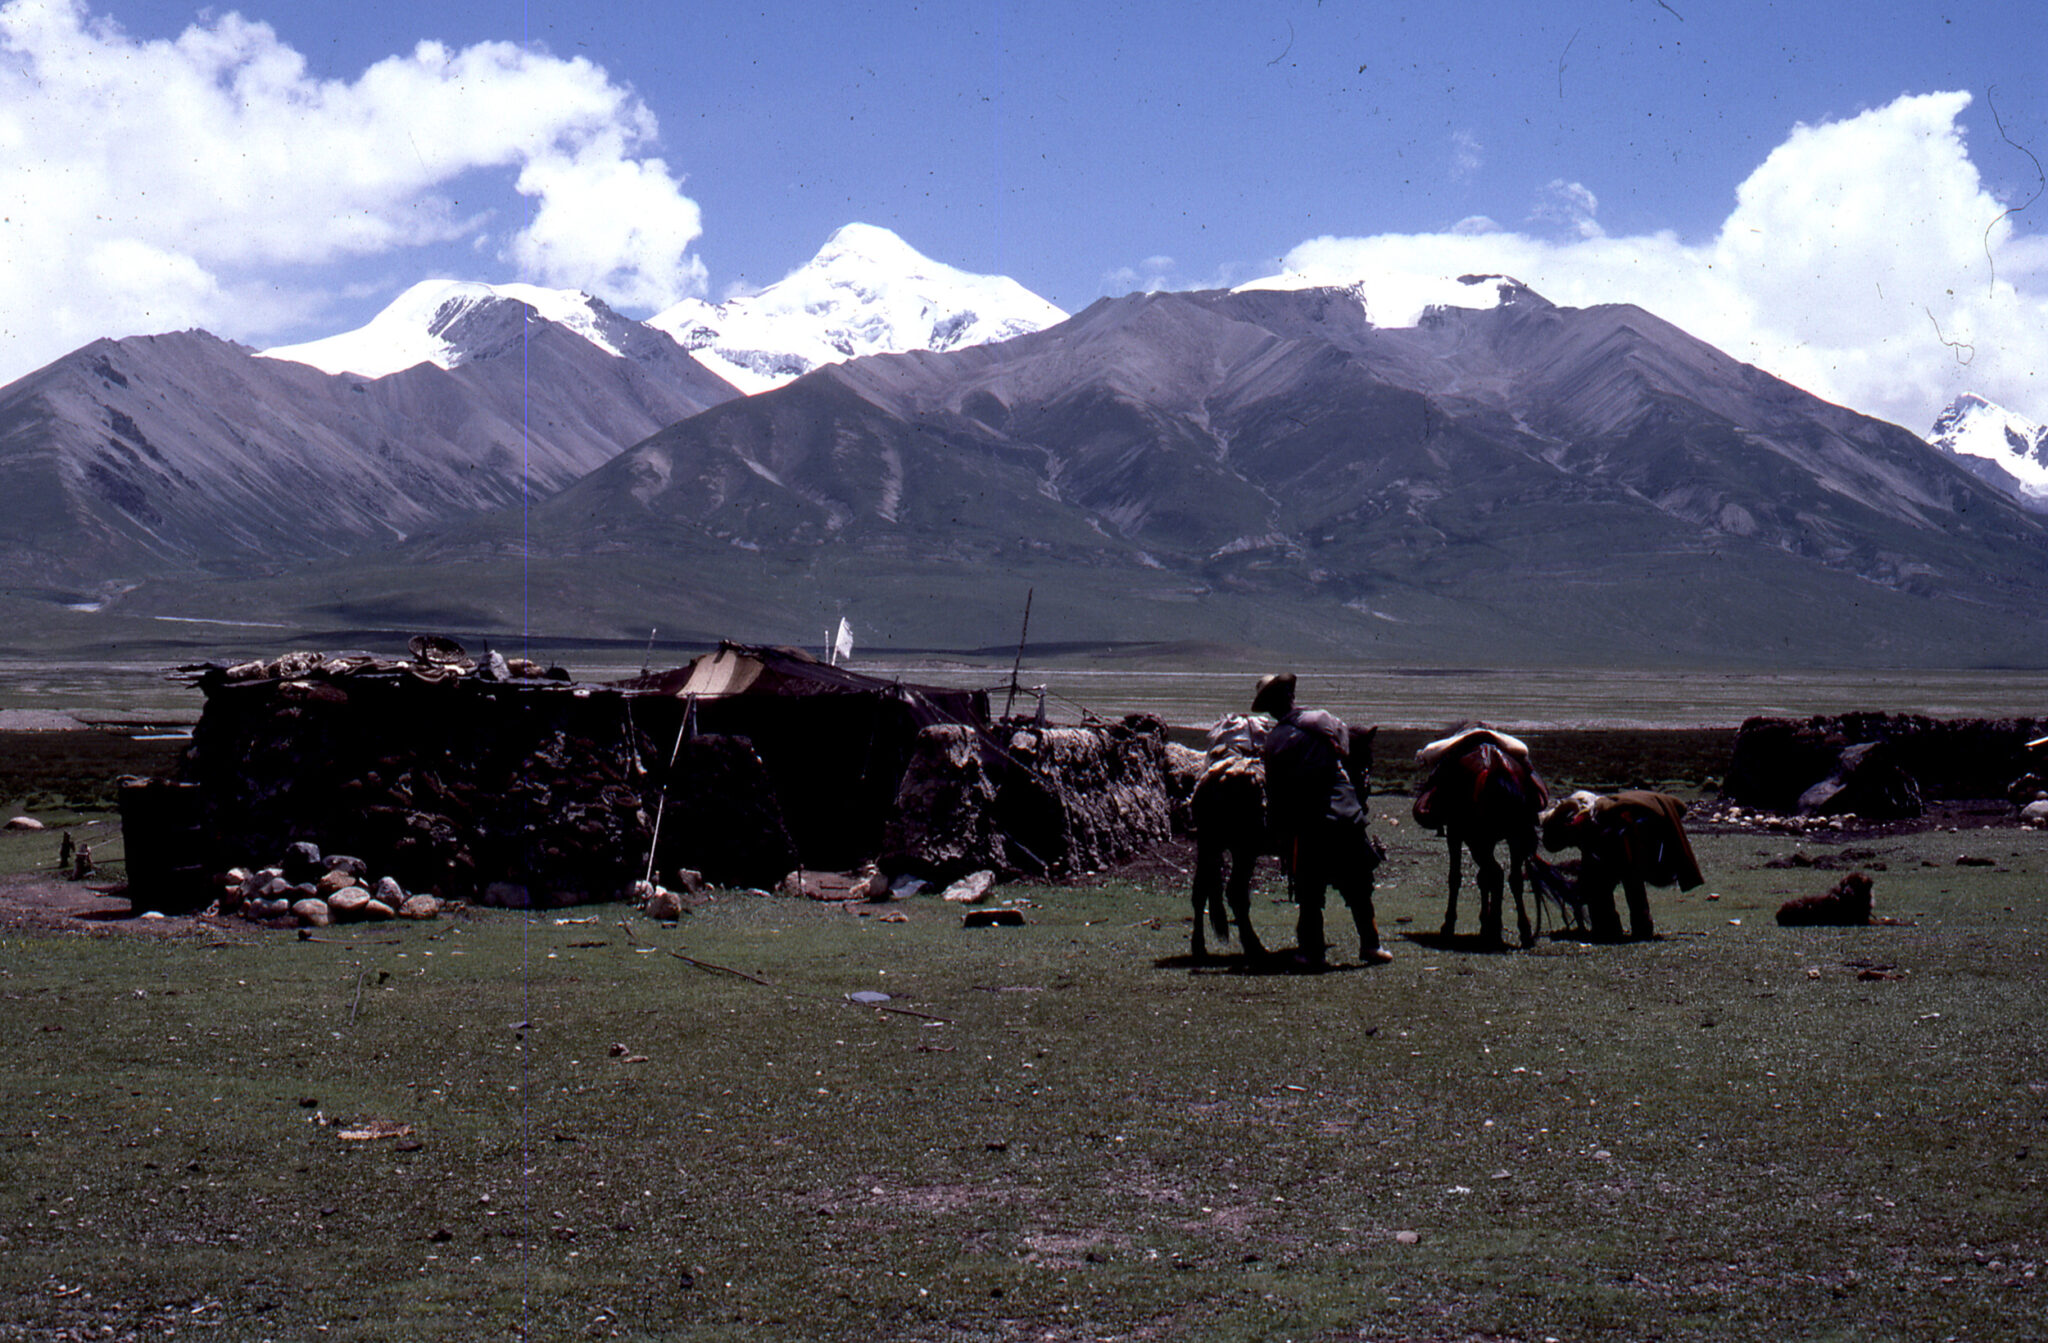 Two people tend to horses beside low-slung camp structures; snowcapped mountain range in background